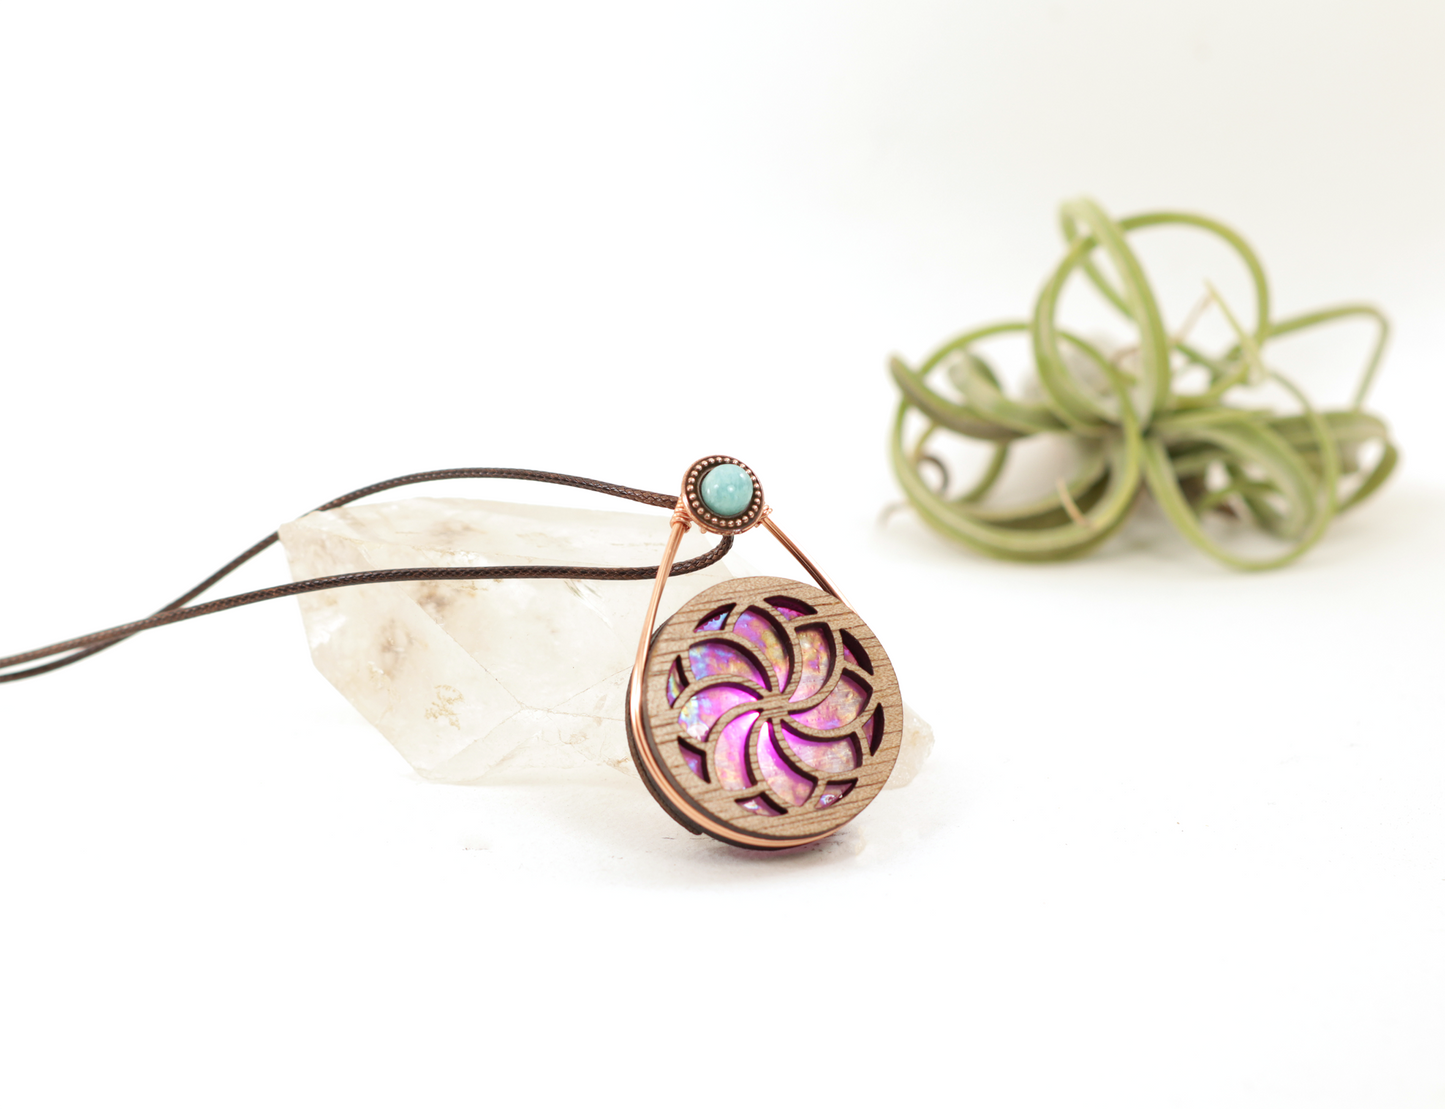 Glowing Iridescent Stained Glass LED Wire Wrapped Pendant | Spiraling Flower